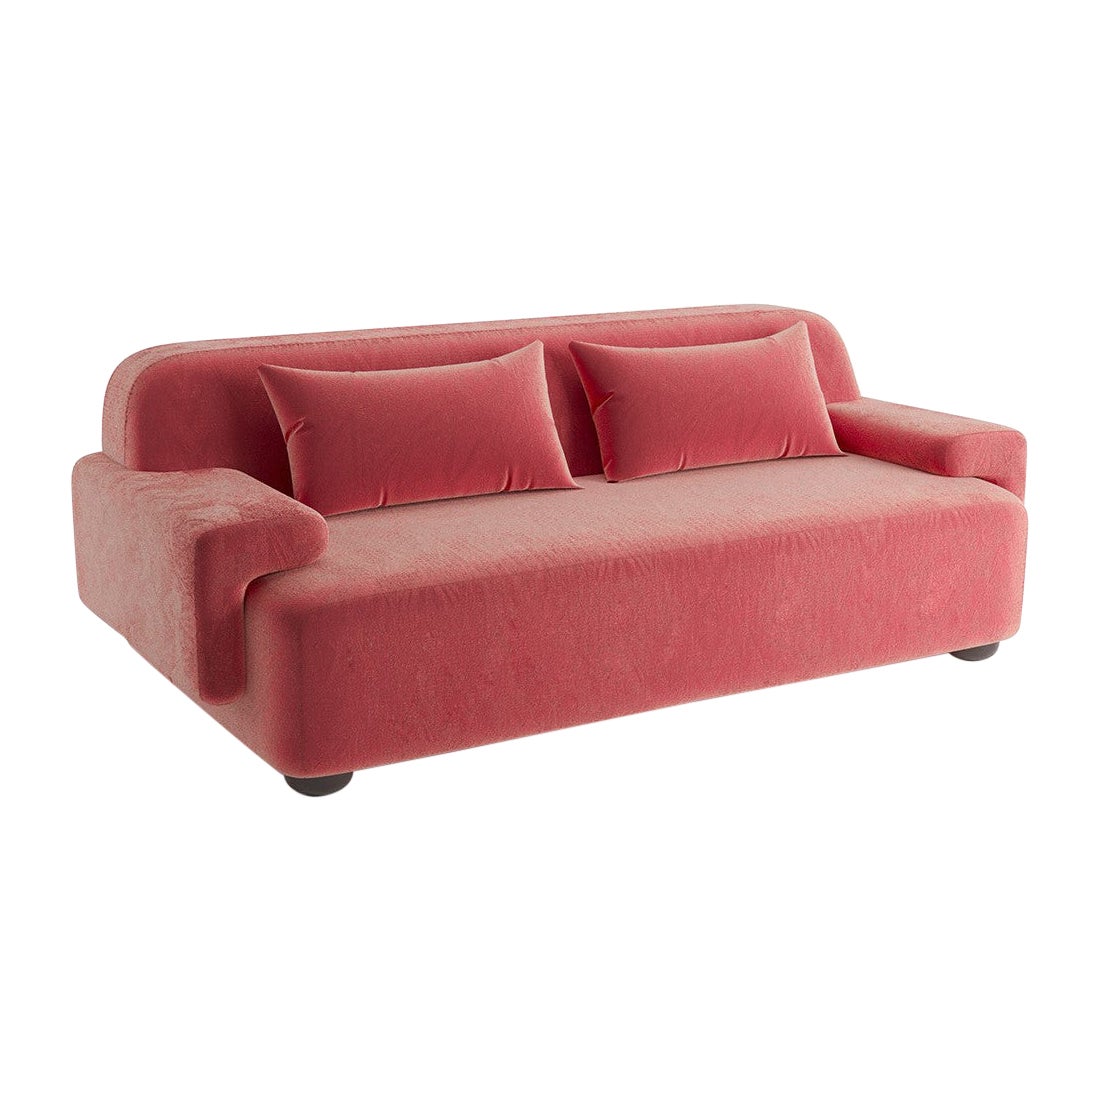 Popus Editions Lena 3 Seater Sofa in Pink Como Velvet Upholstery For Sale